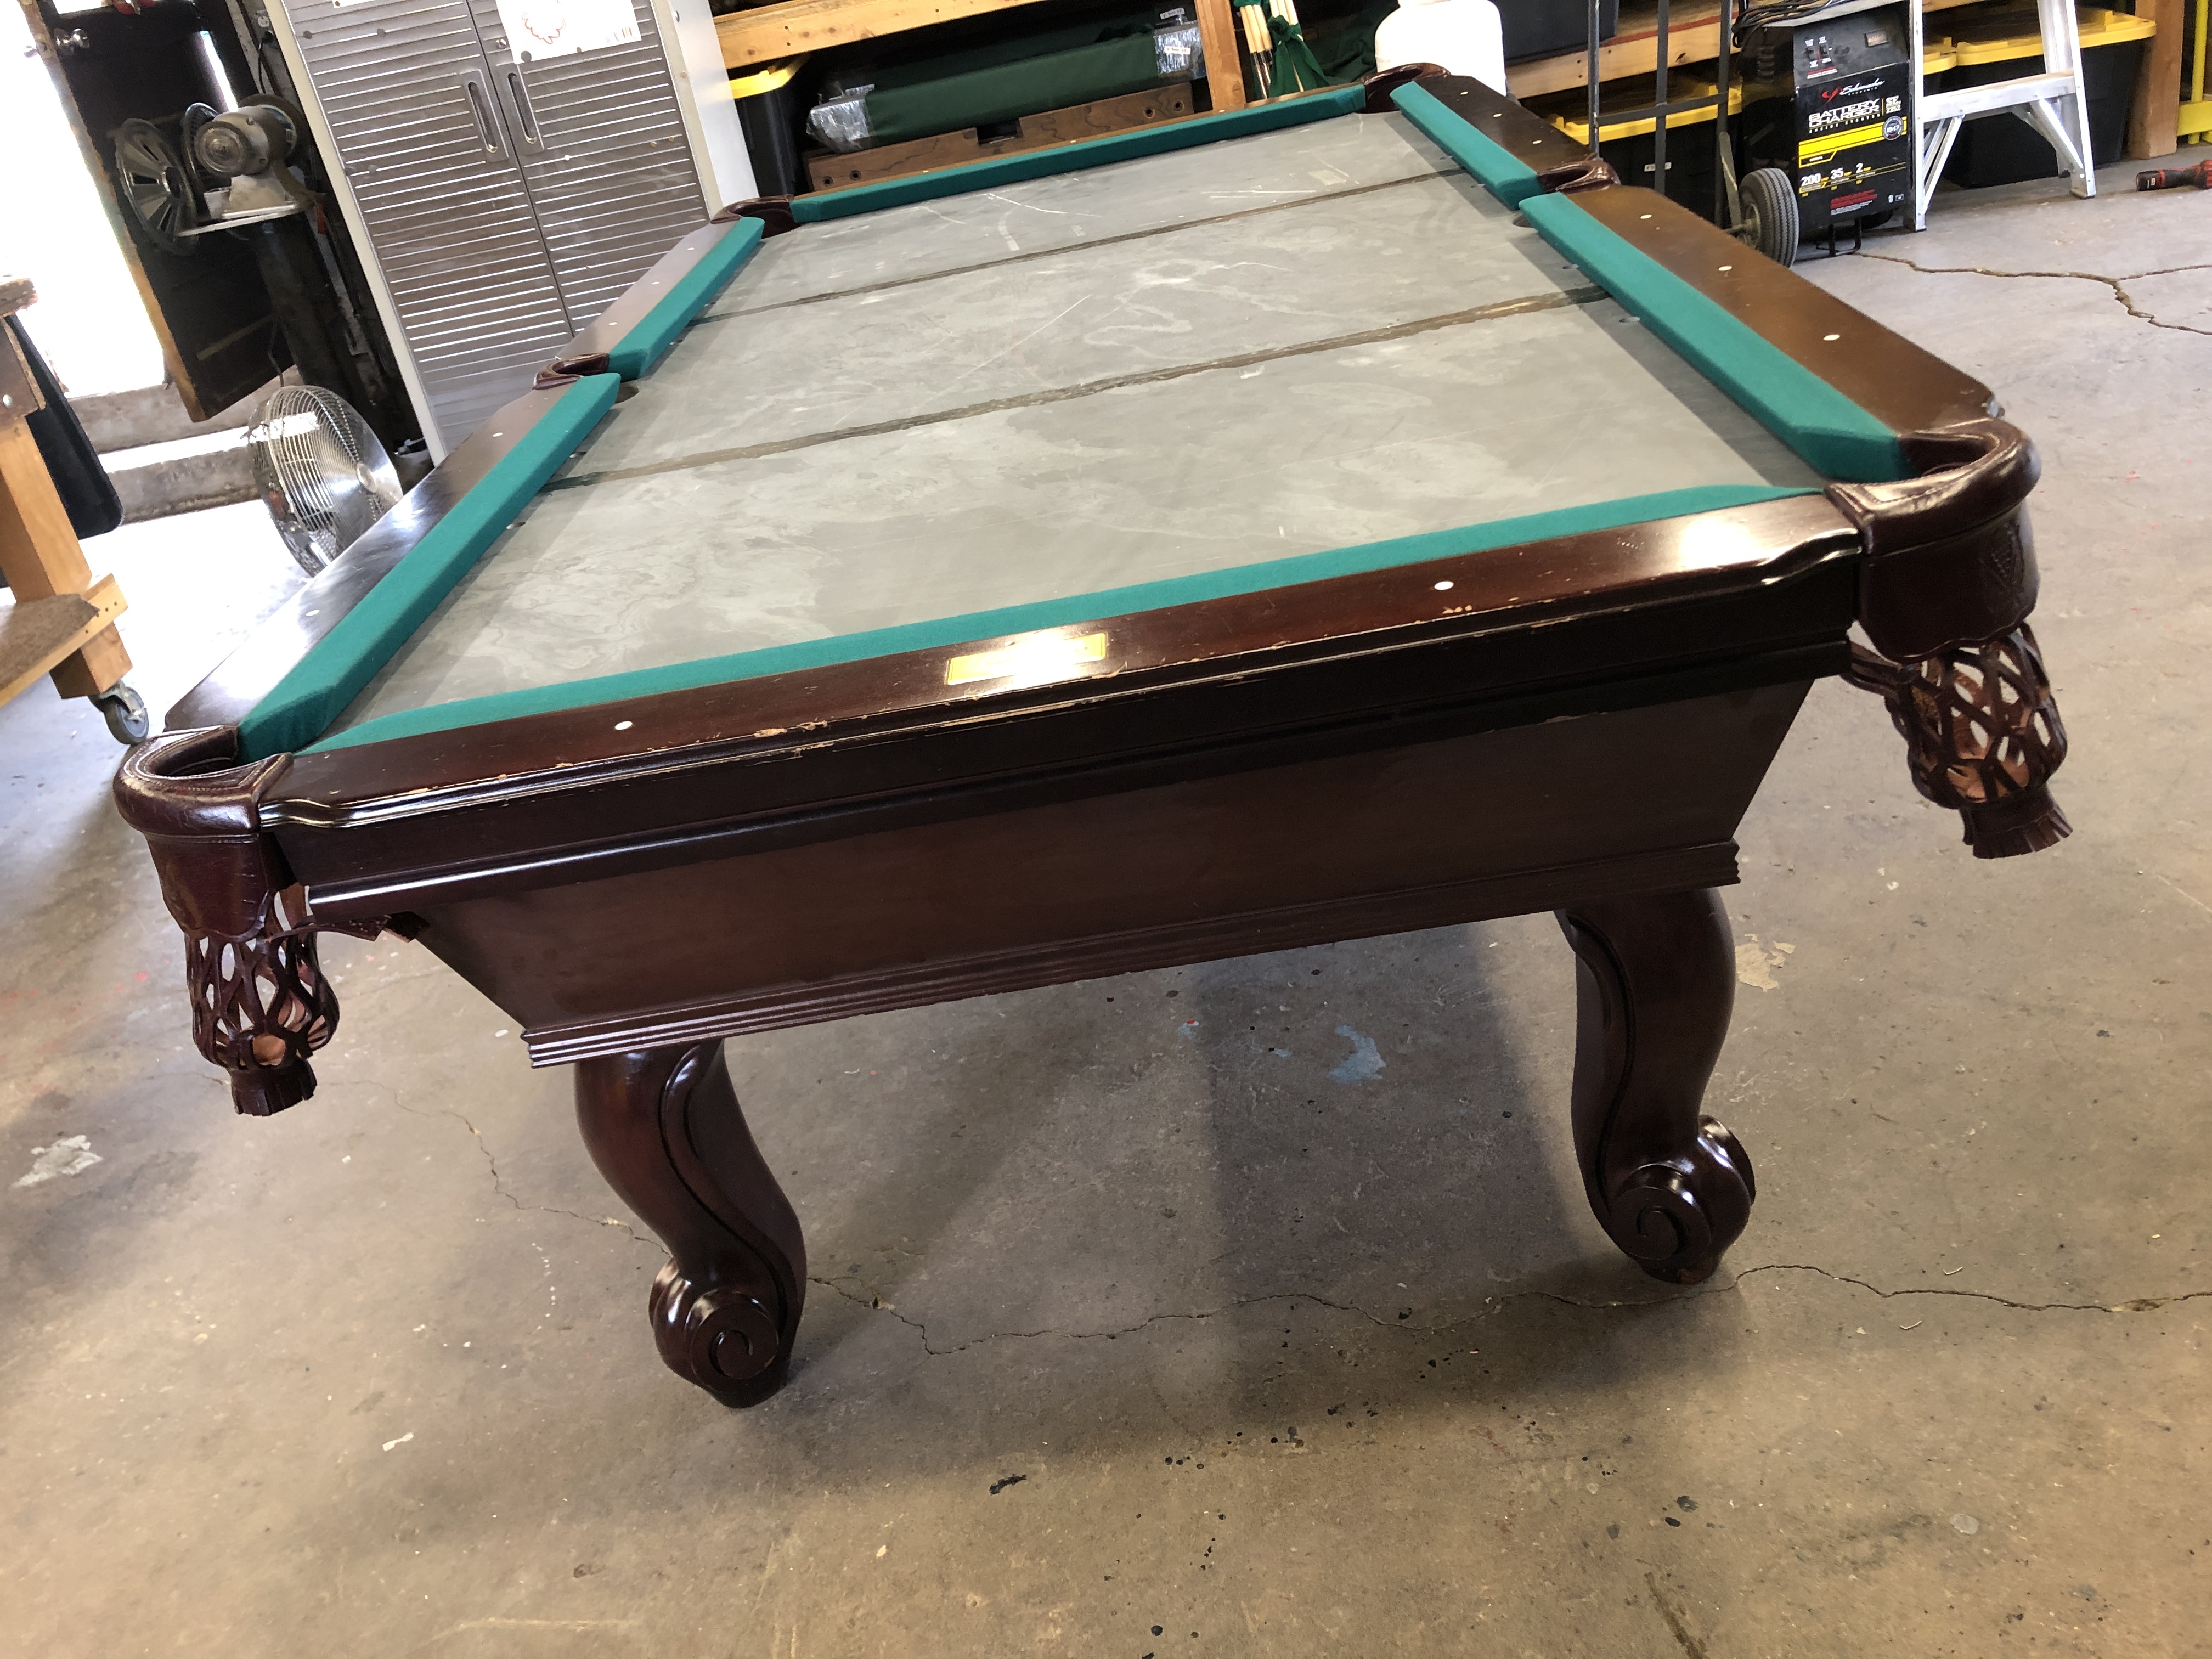 Used pool table for sale Colorado:  8' Connelly 'Catalina'  <br>Includes new cushions and cloth in your color choice.   <br>MADE IN USA!! 